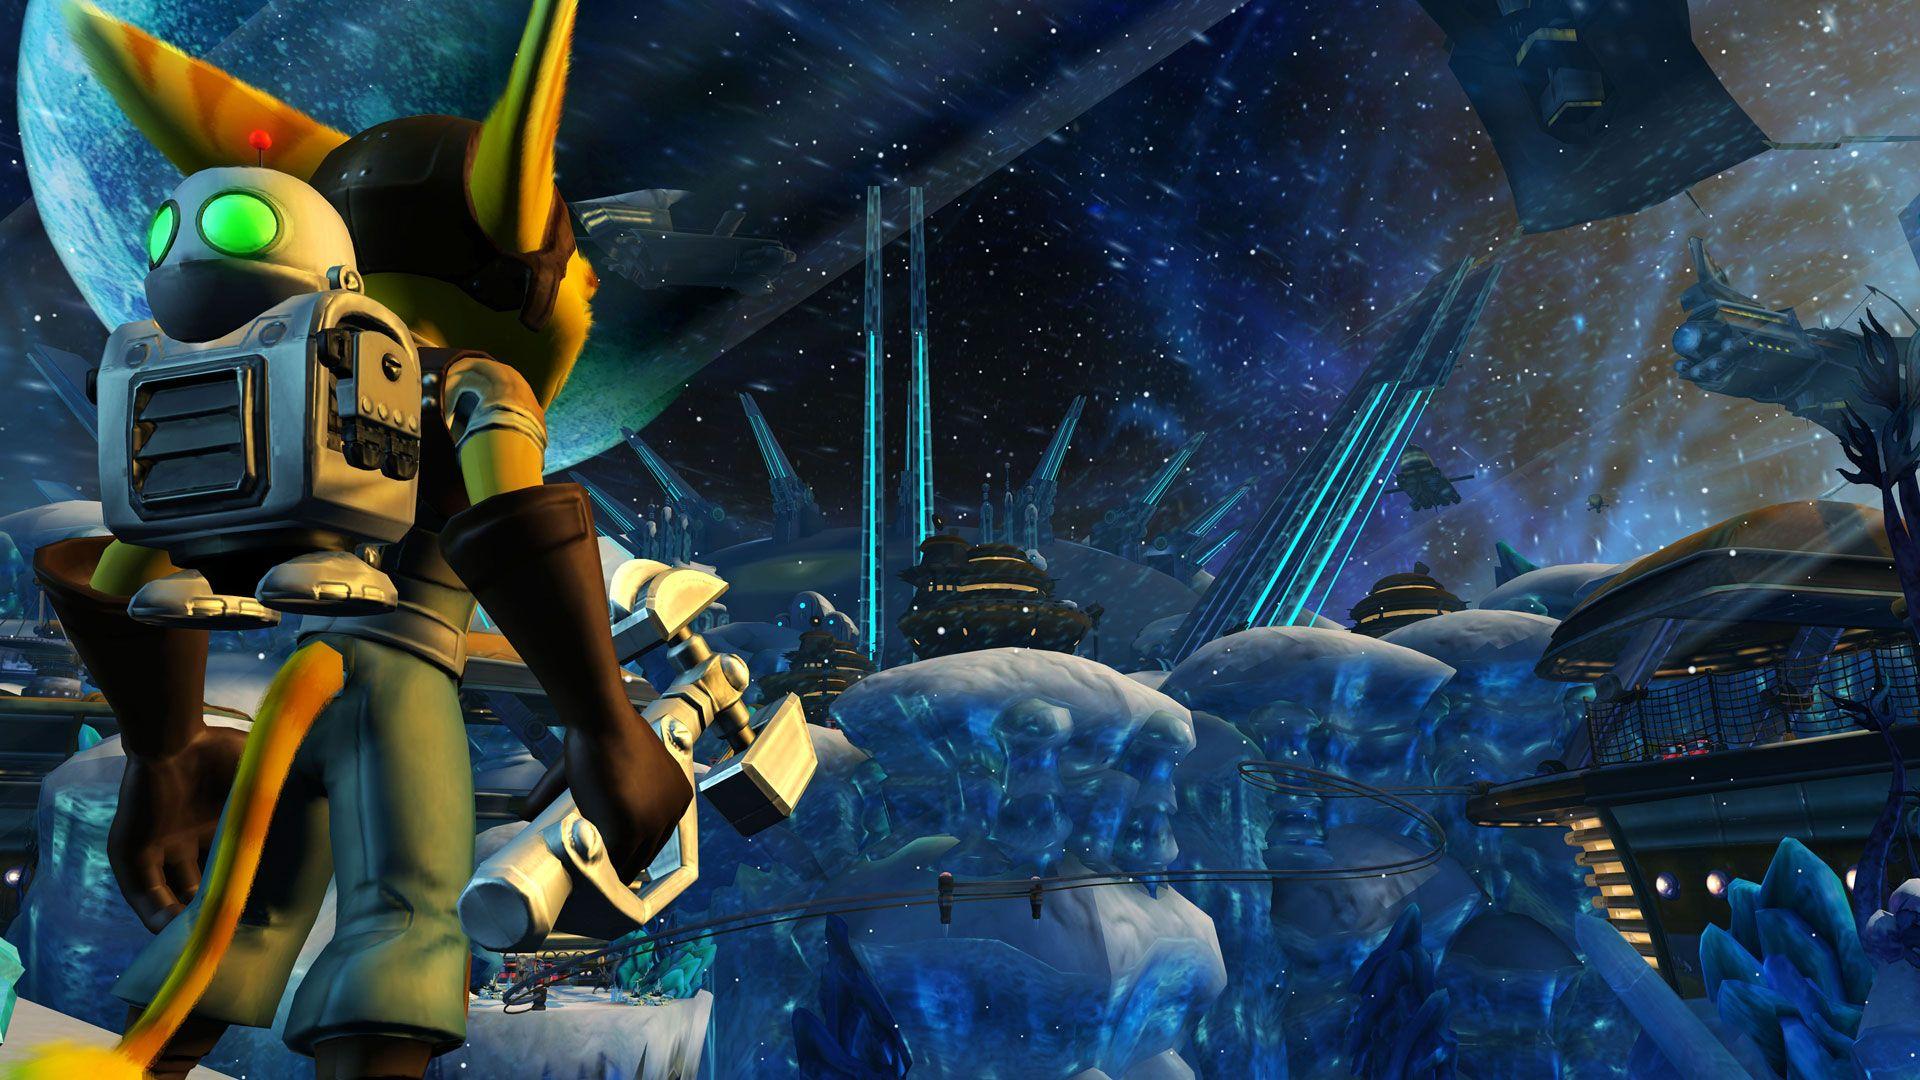 Rumor: Ratchet & Clank Trilogy could be coming to PS Vita, take a